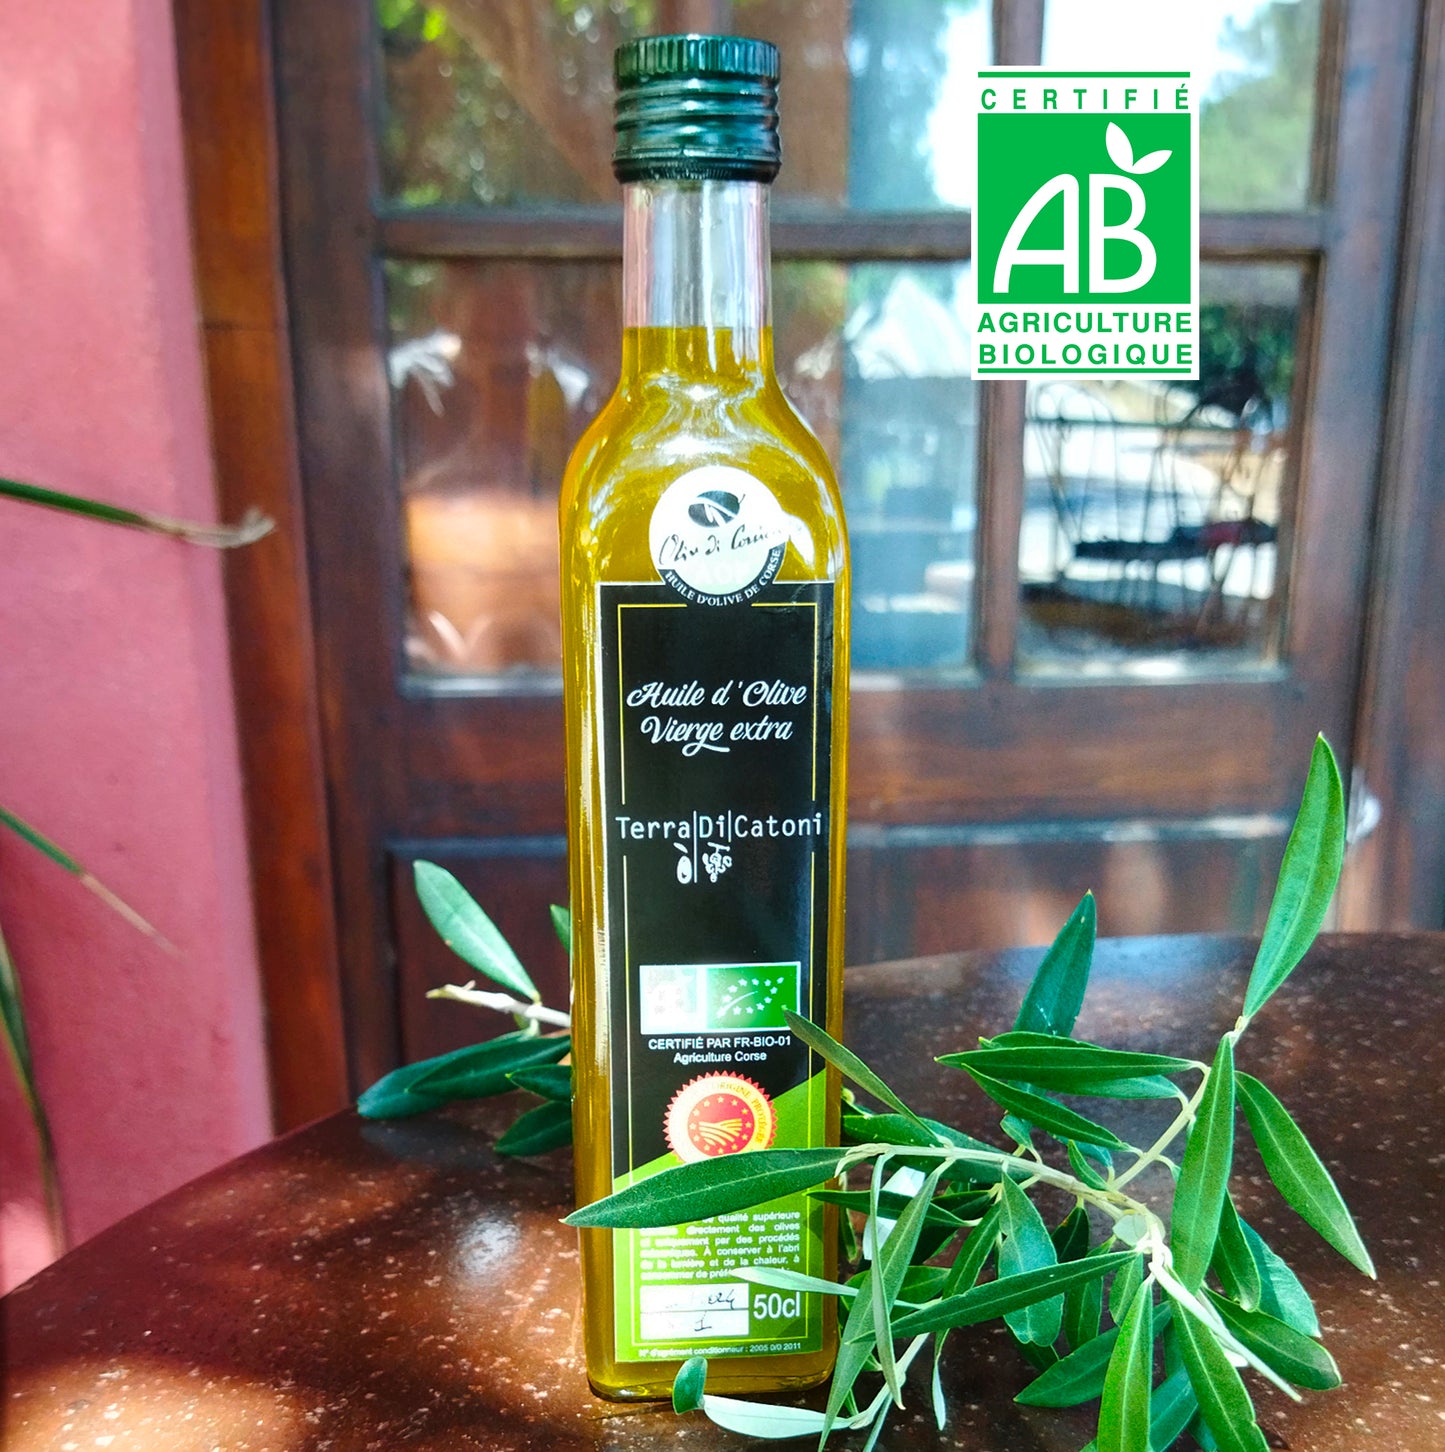 Corsican “fruity green” olive oil (50cl)